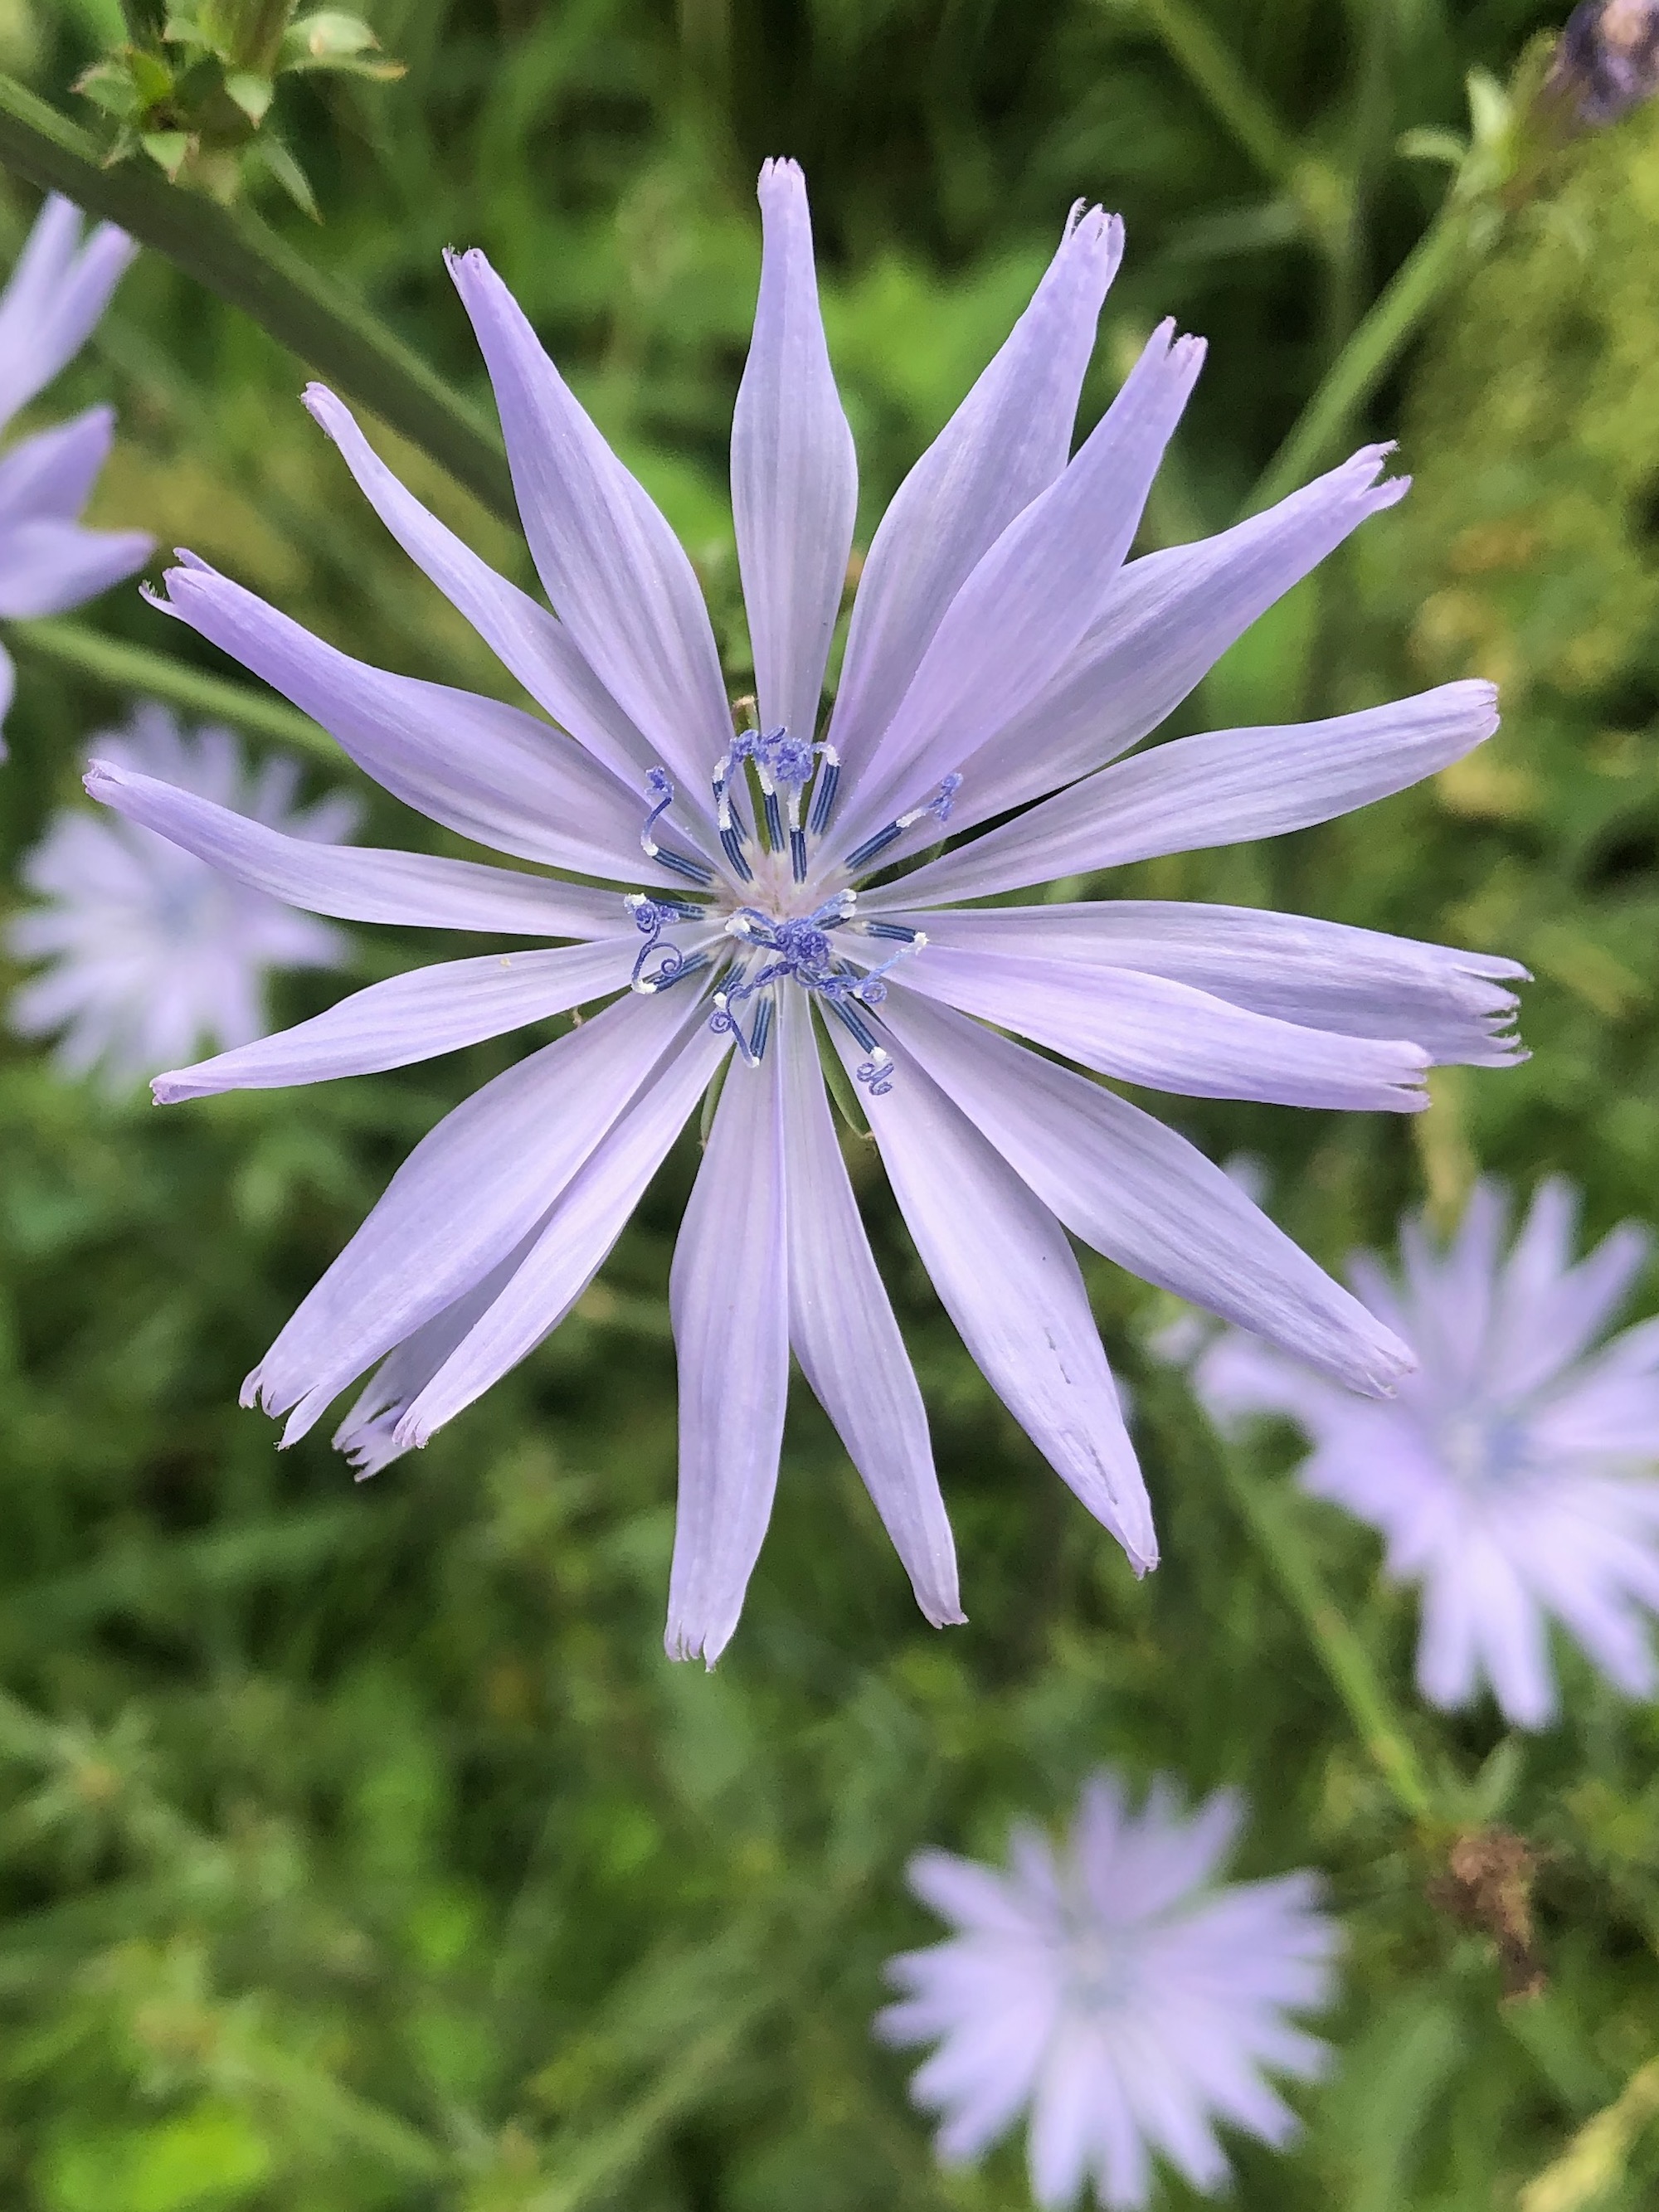 Chicory in Marion Dunn Prairie in Madison, Wisconsin on June 29, 2020.